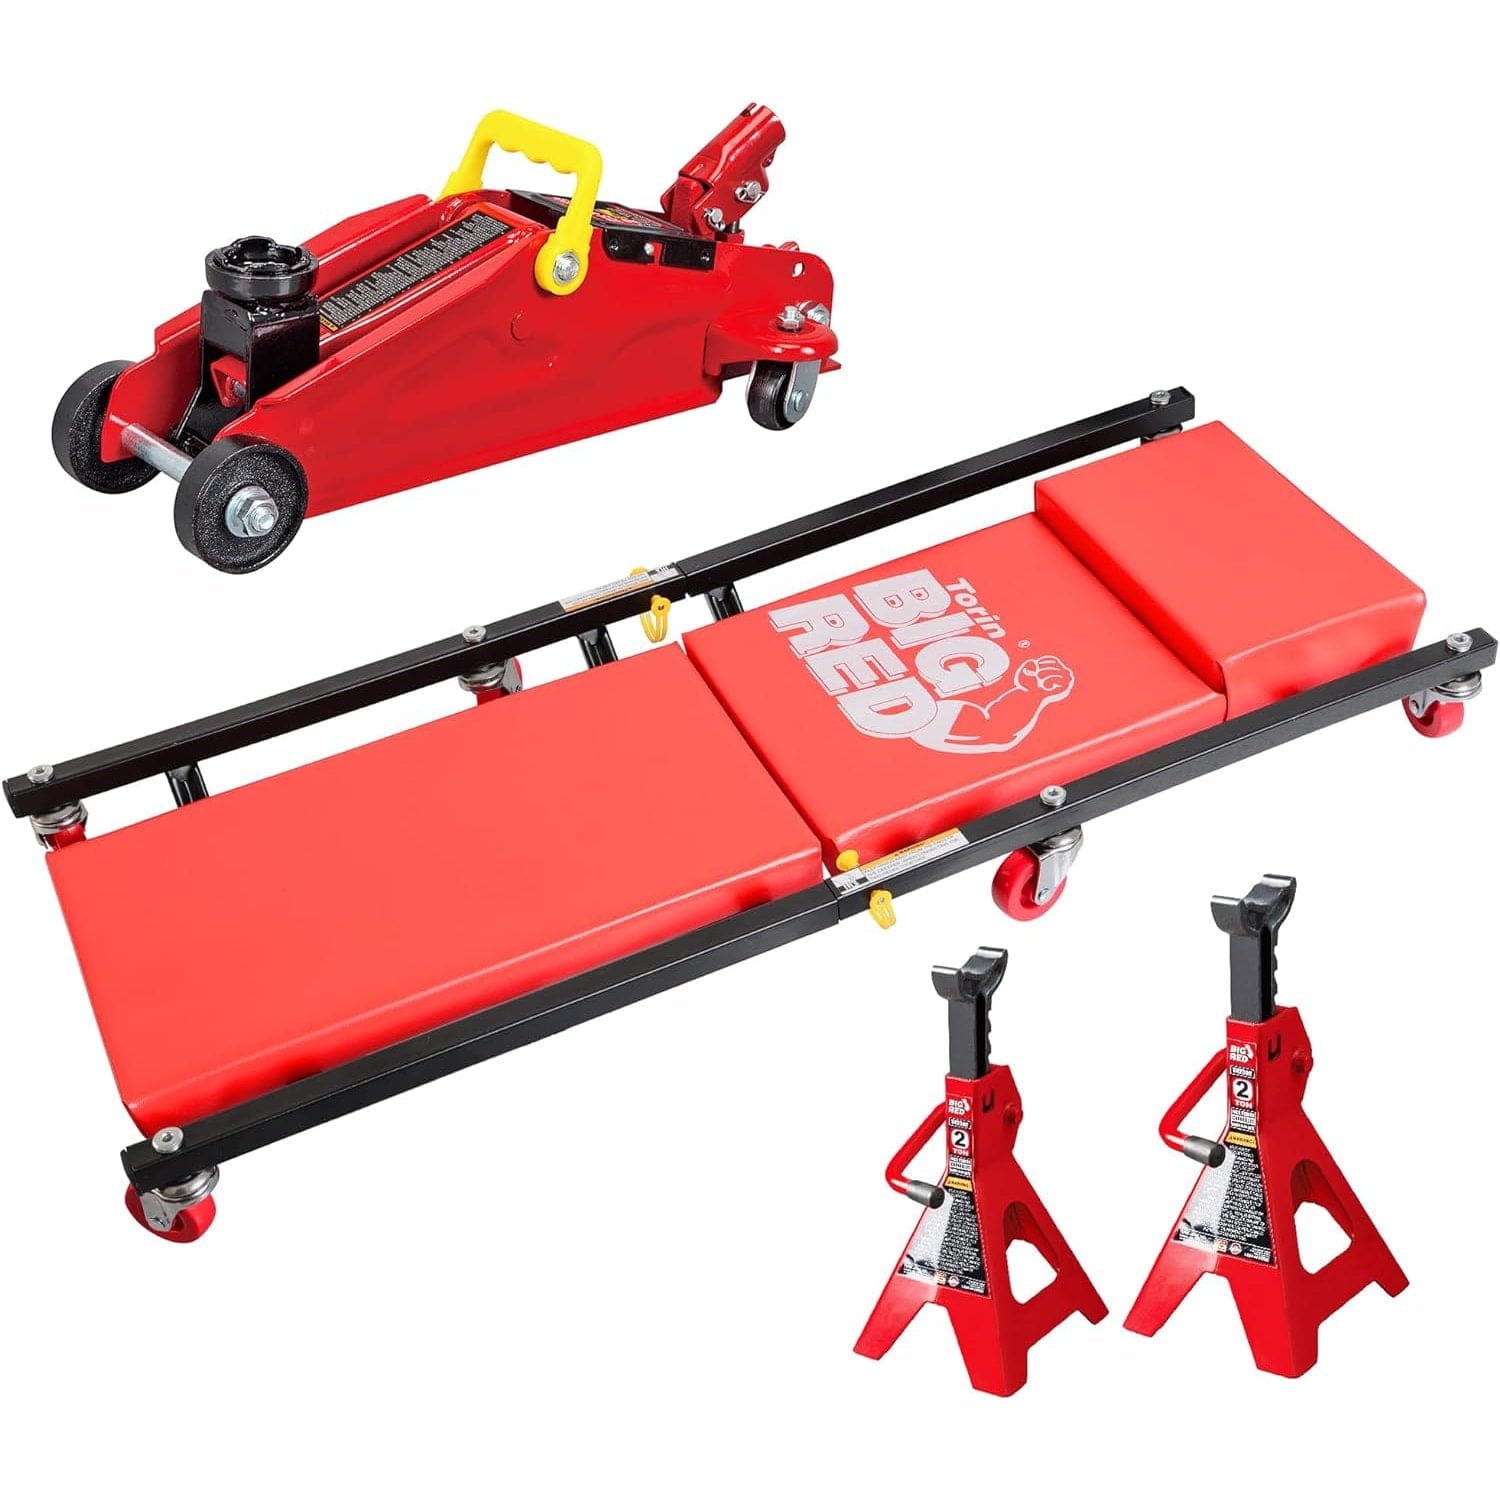 big-red-2-ton-floor-jack-with-jack-stands-and-creeper